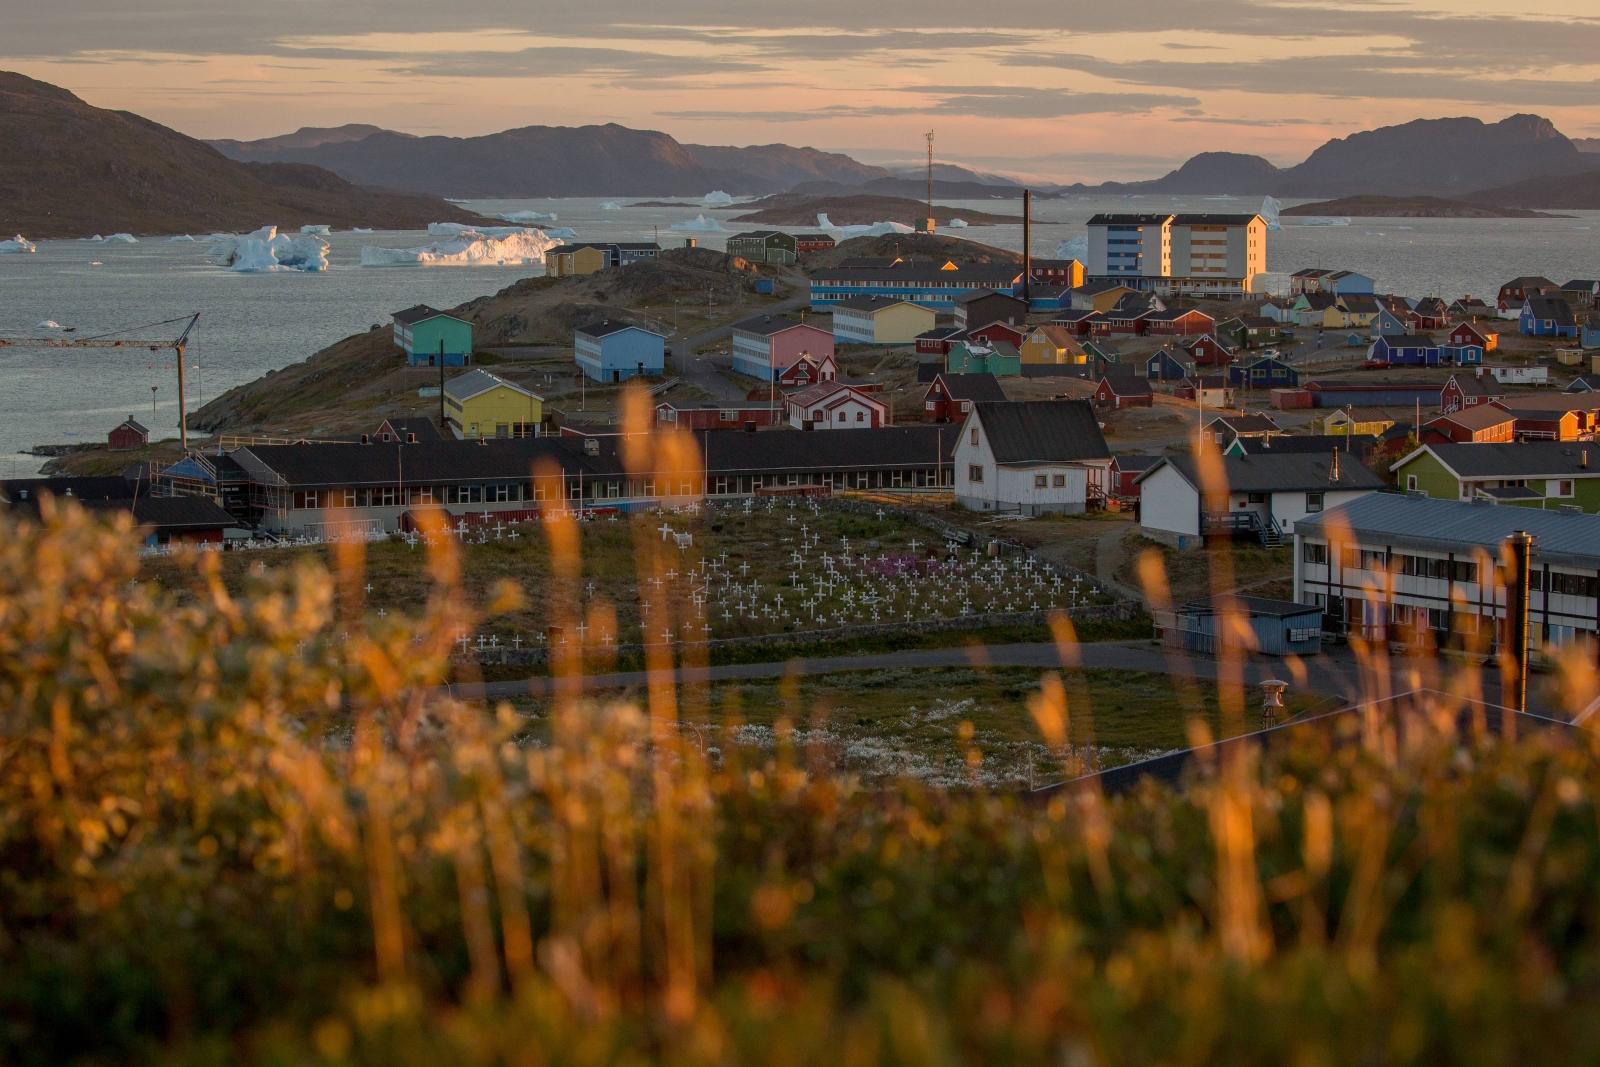 Sunset over Narsaq and the bay with icebergs in South Greenland. Photo by Mads Pihl